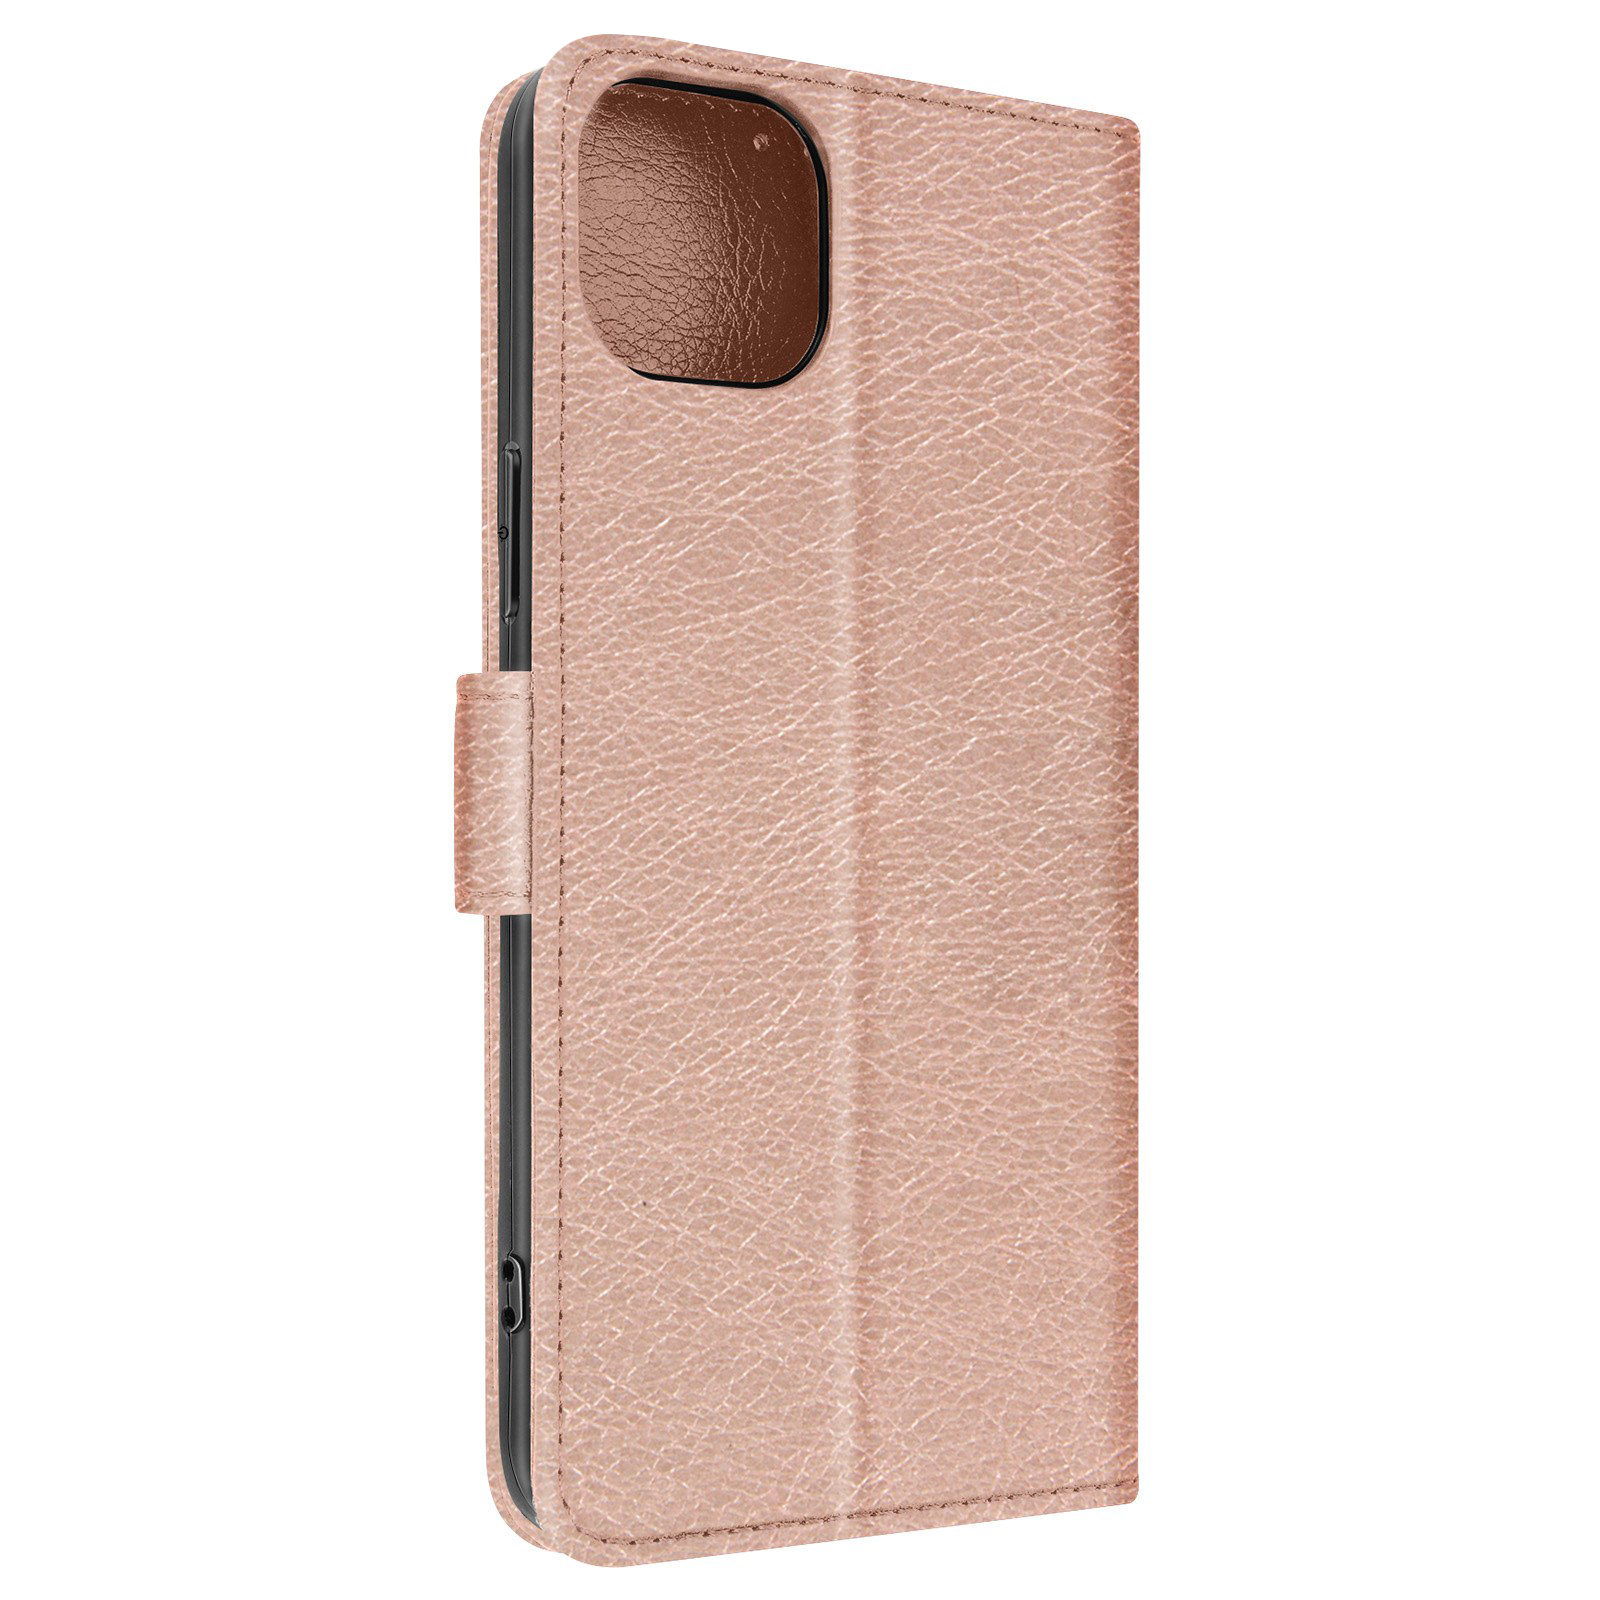 14 Series, Chester Apple, Plus, Rosegold Bookcover, AVIZAR iPhone